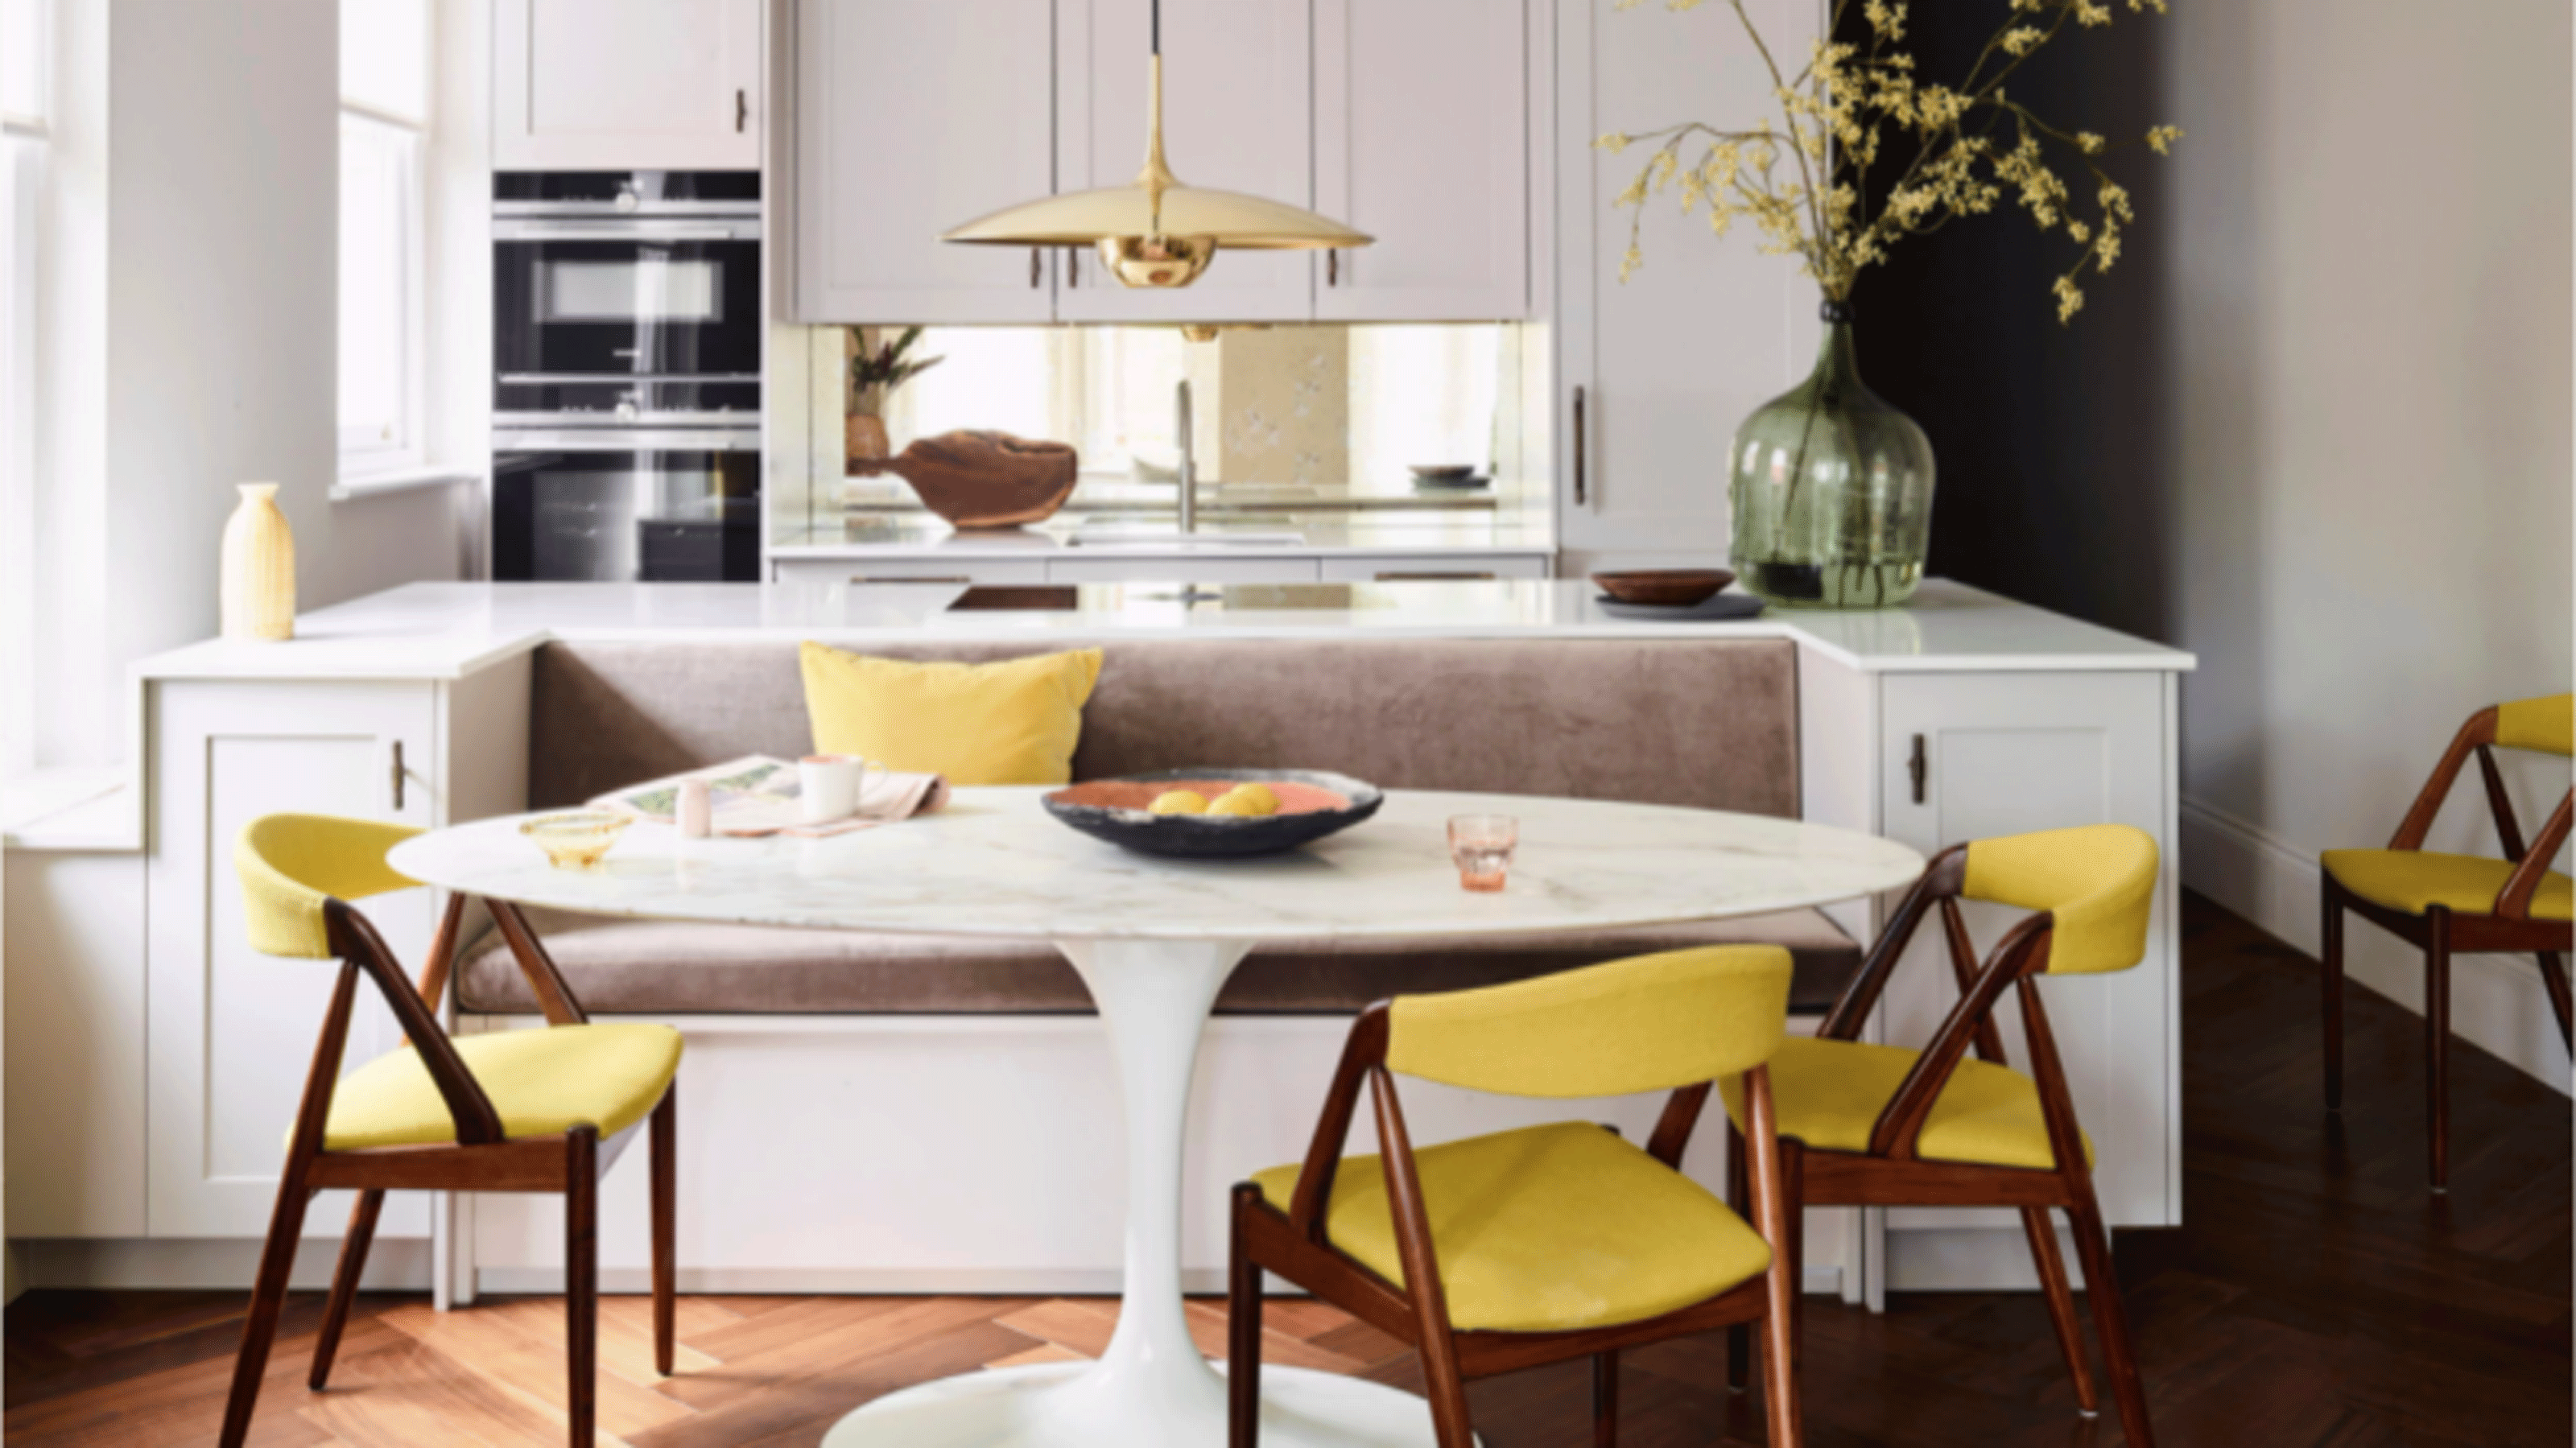 Banquette seating in kitchen with bright yellow chairs